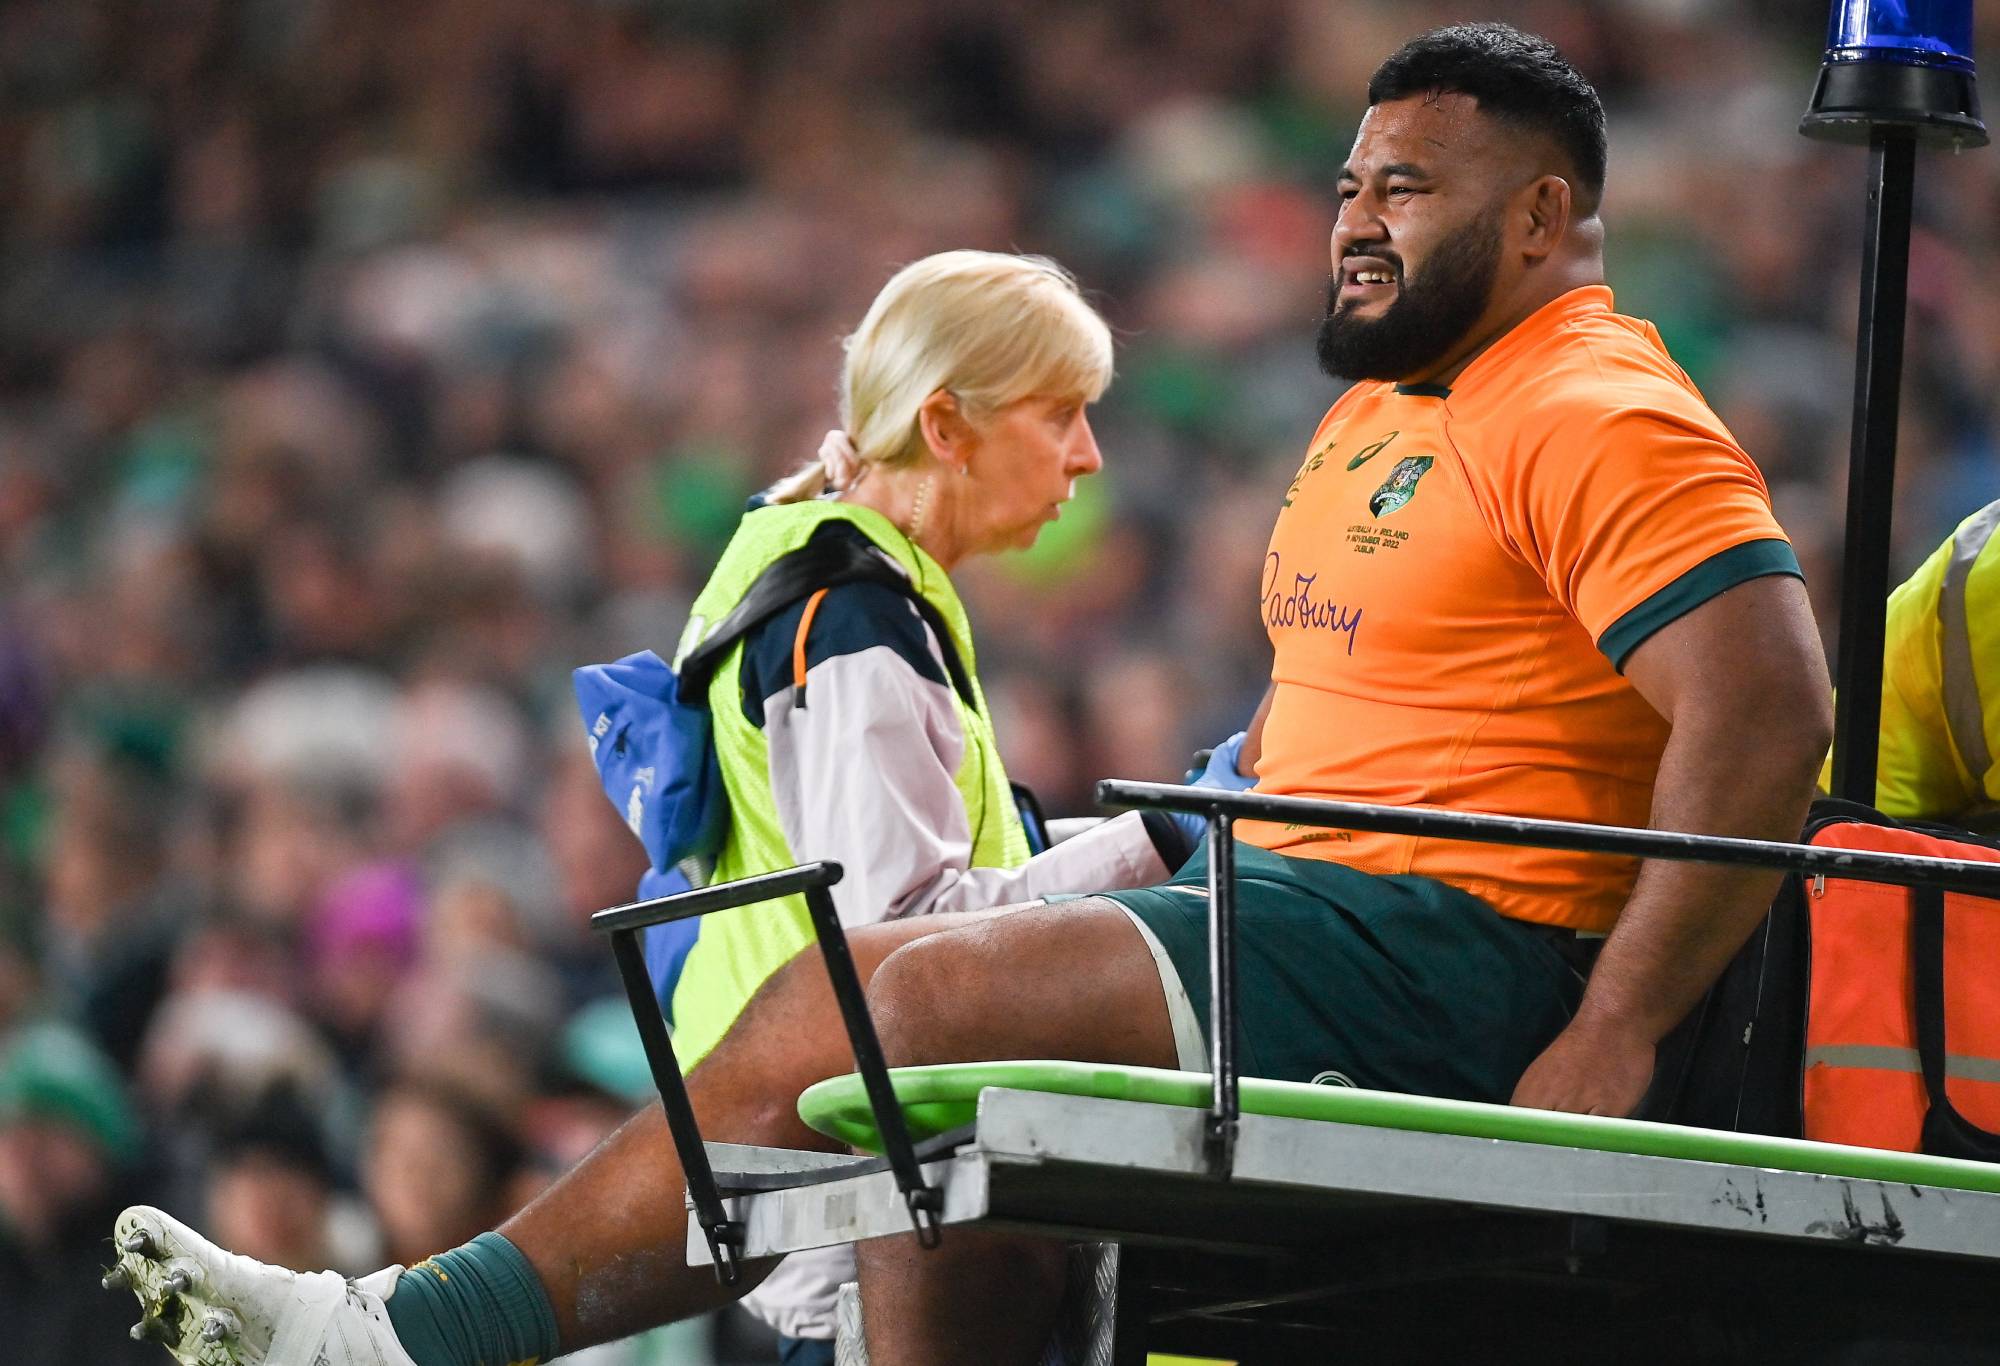 Australia's Taniela Tupou is sent off to attract media attention during the Bank of Ireland Nations Series match between Ireland and Australia at the Aviva Stadium in Dublin.  (Photo by Ramsey Cardy/Sportsfile via Getty Images)